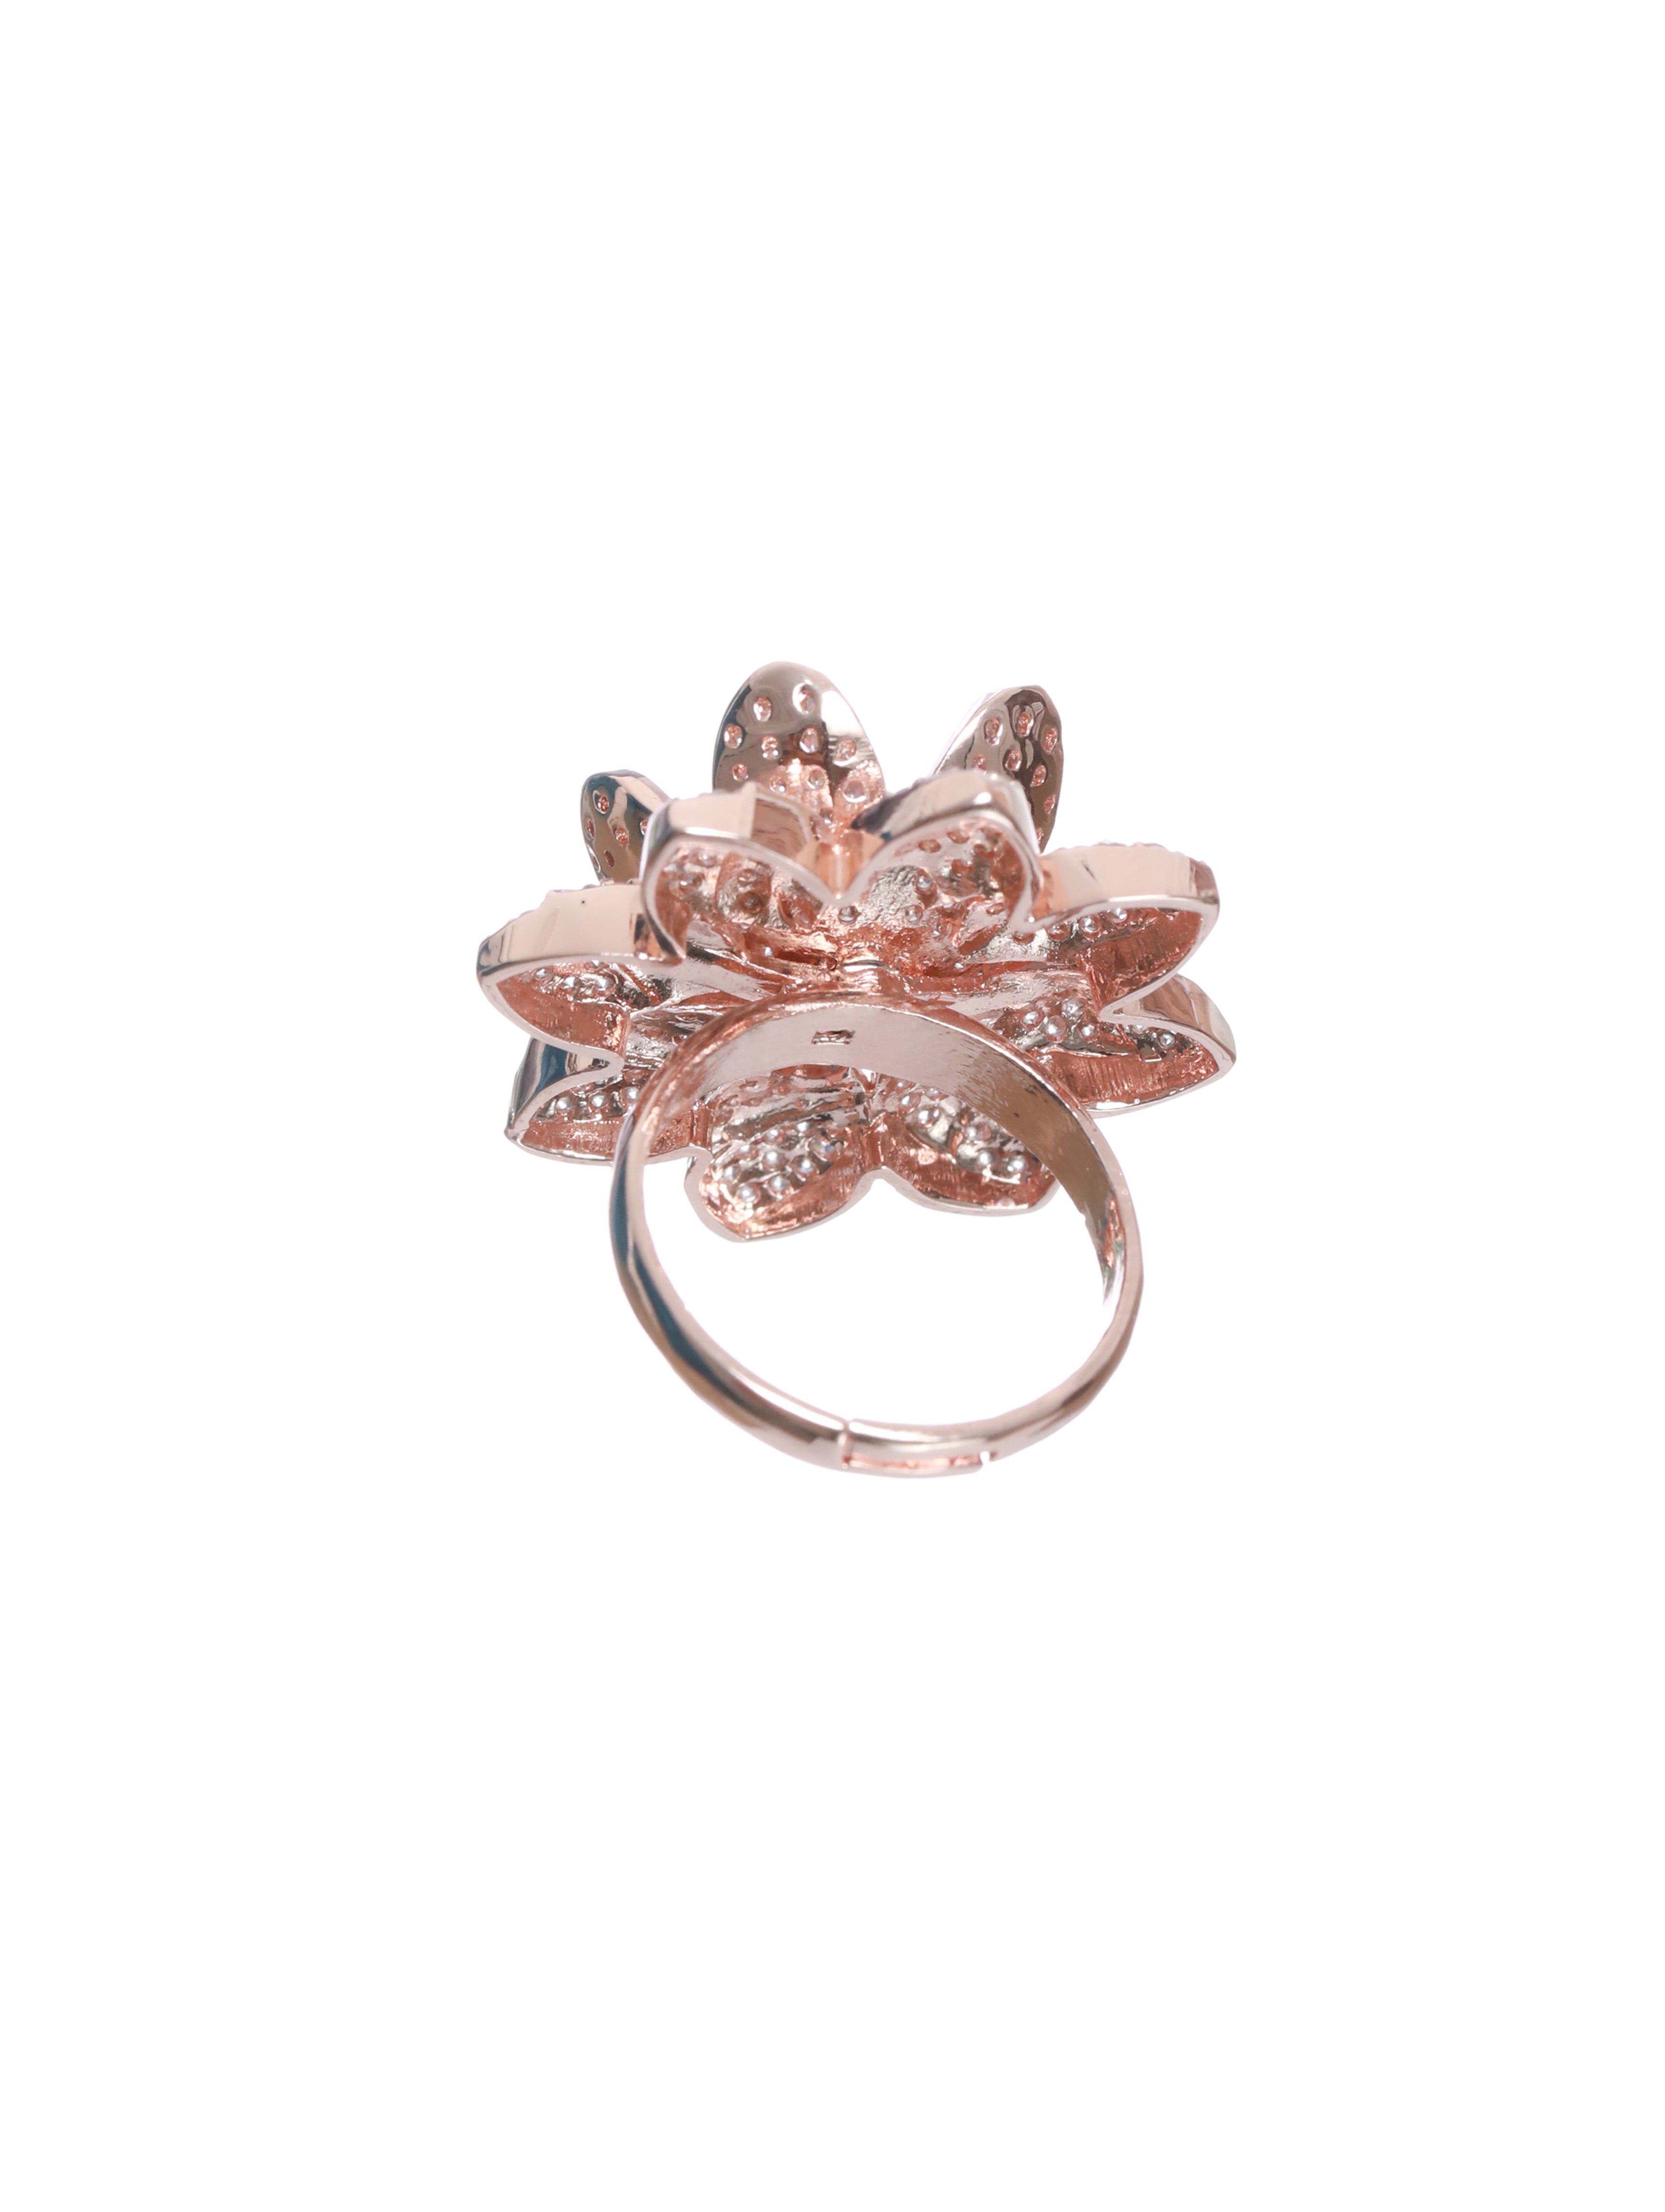 Rose Gold Plated Handcrafted American Diamond Studded Adjustable Floral Finger Ring - Jazzandsizzle